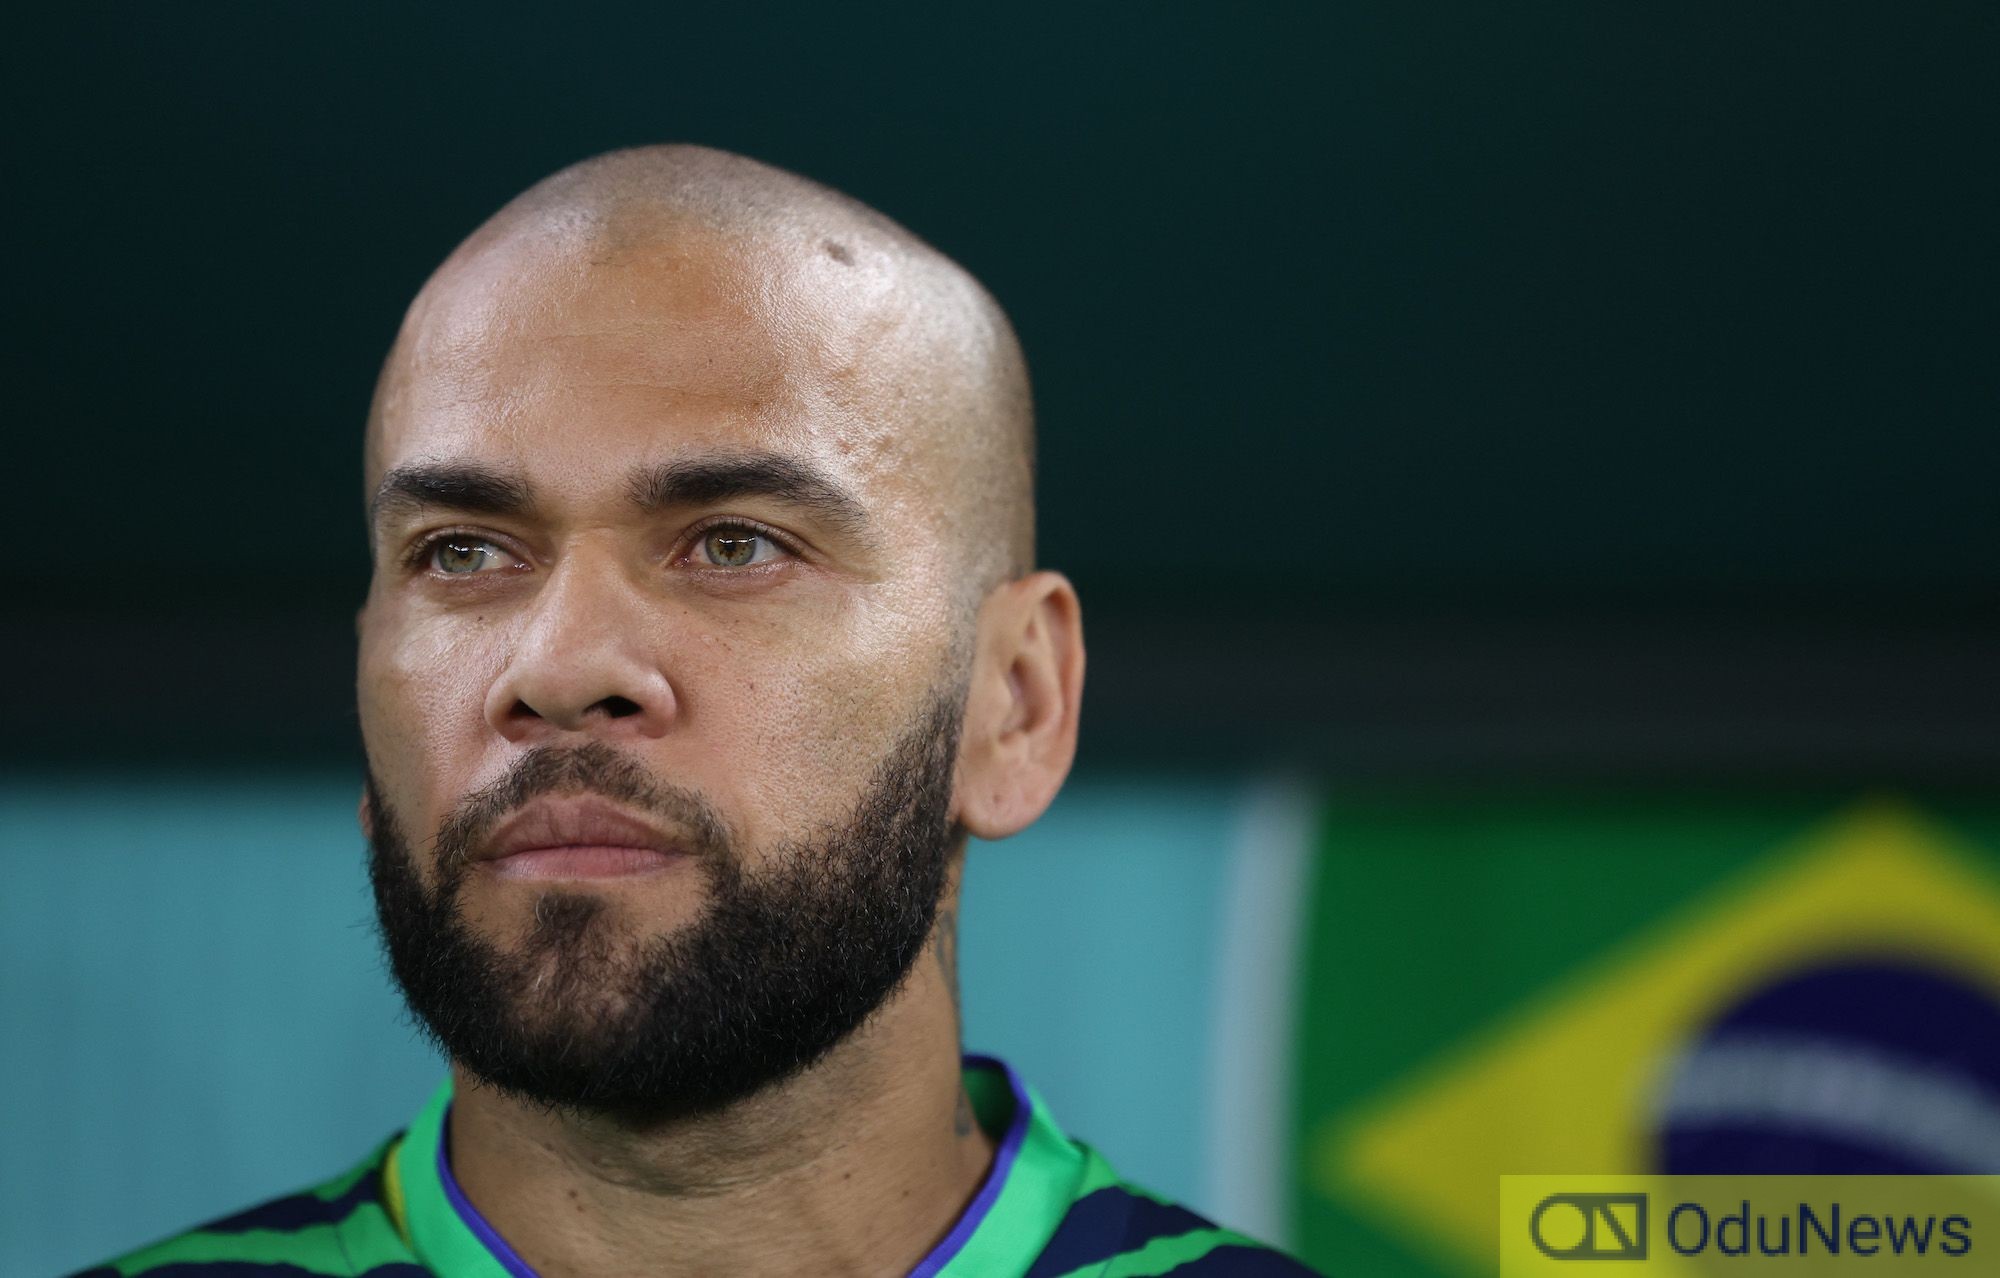 Dani Alves Faces Sexual Assault Charges In Spain  